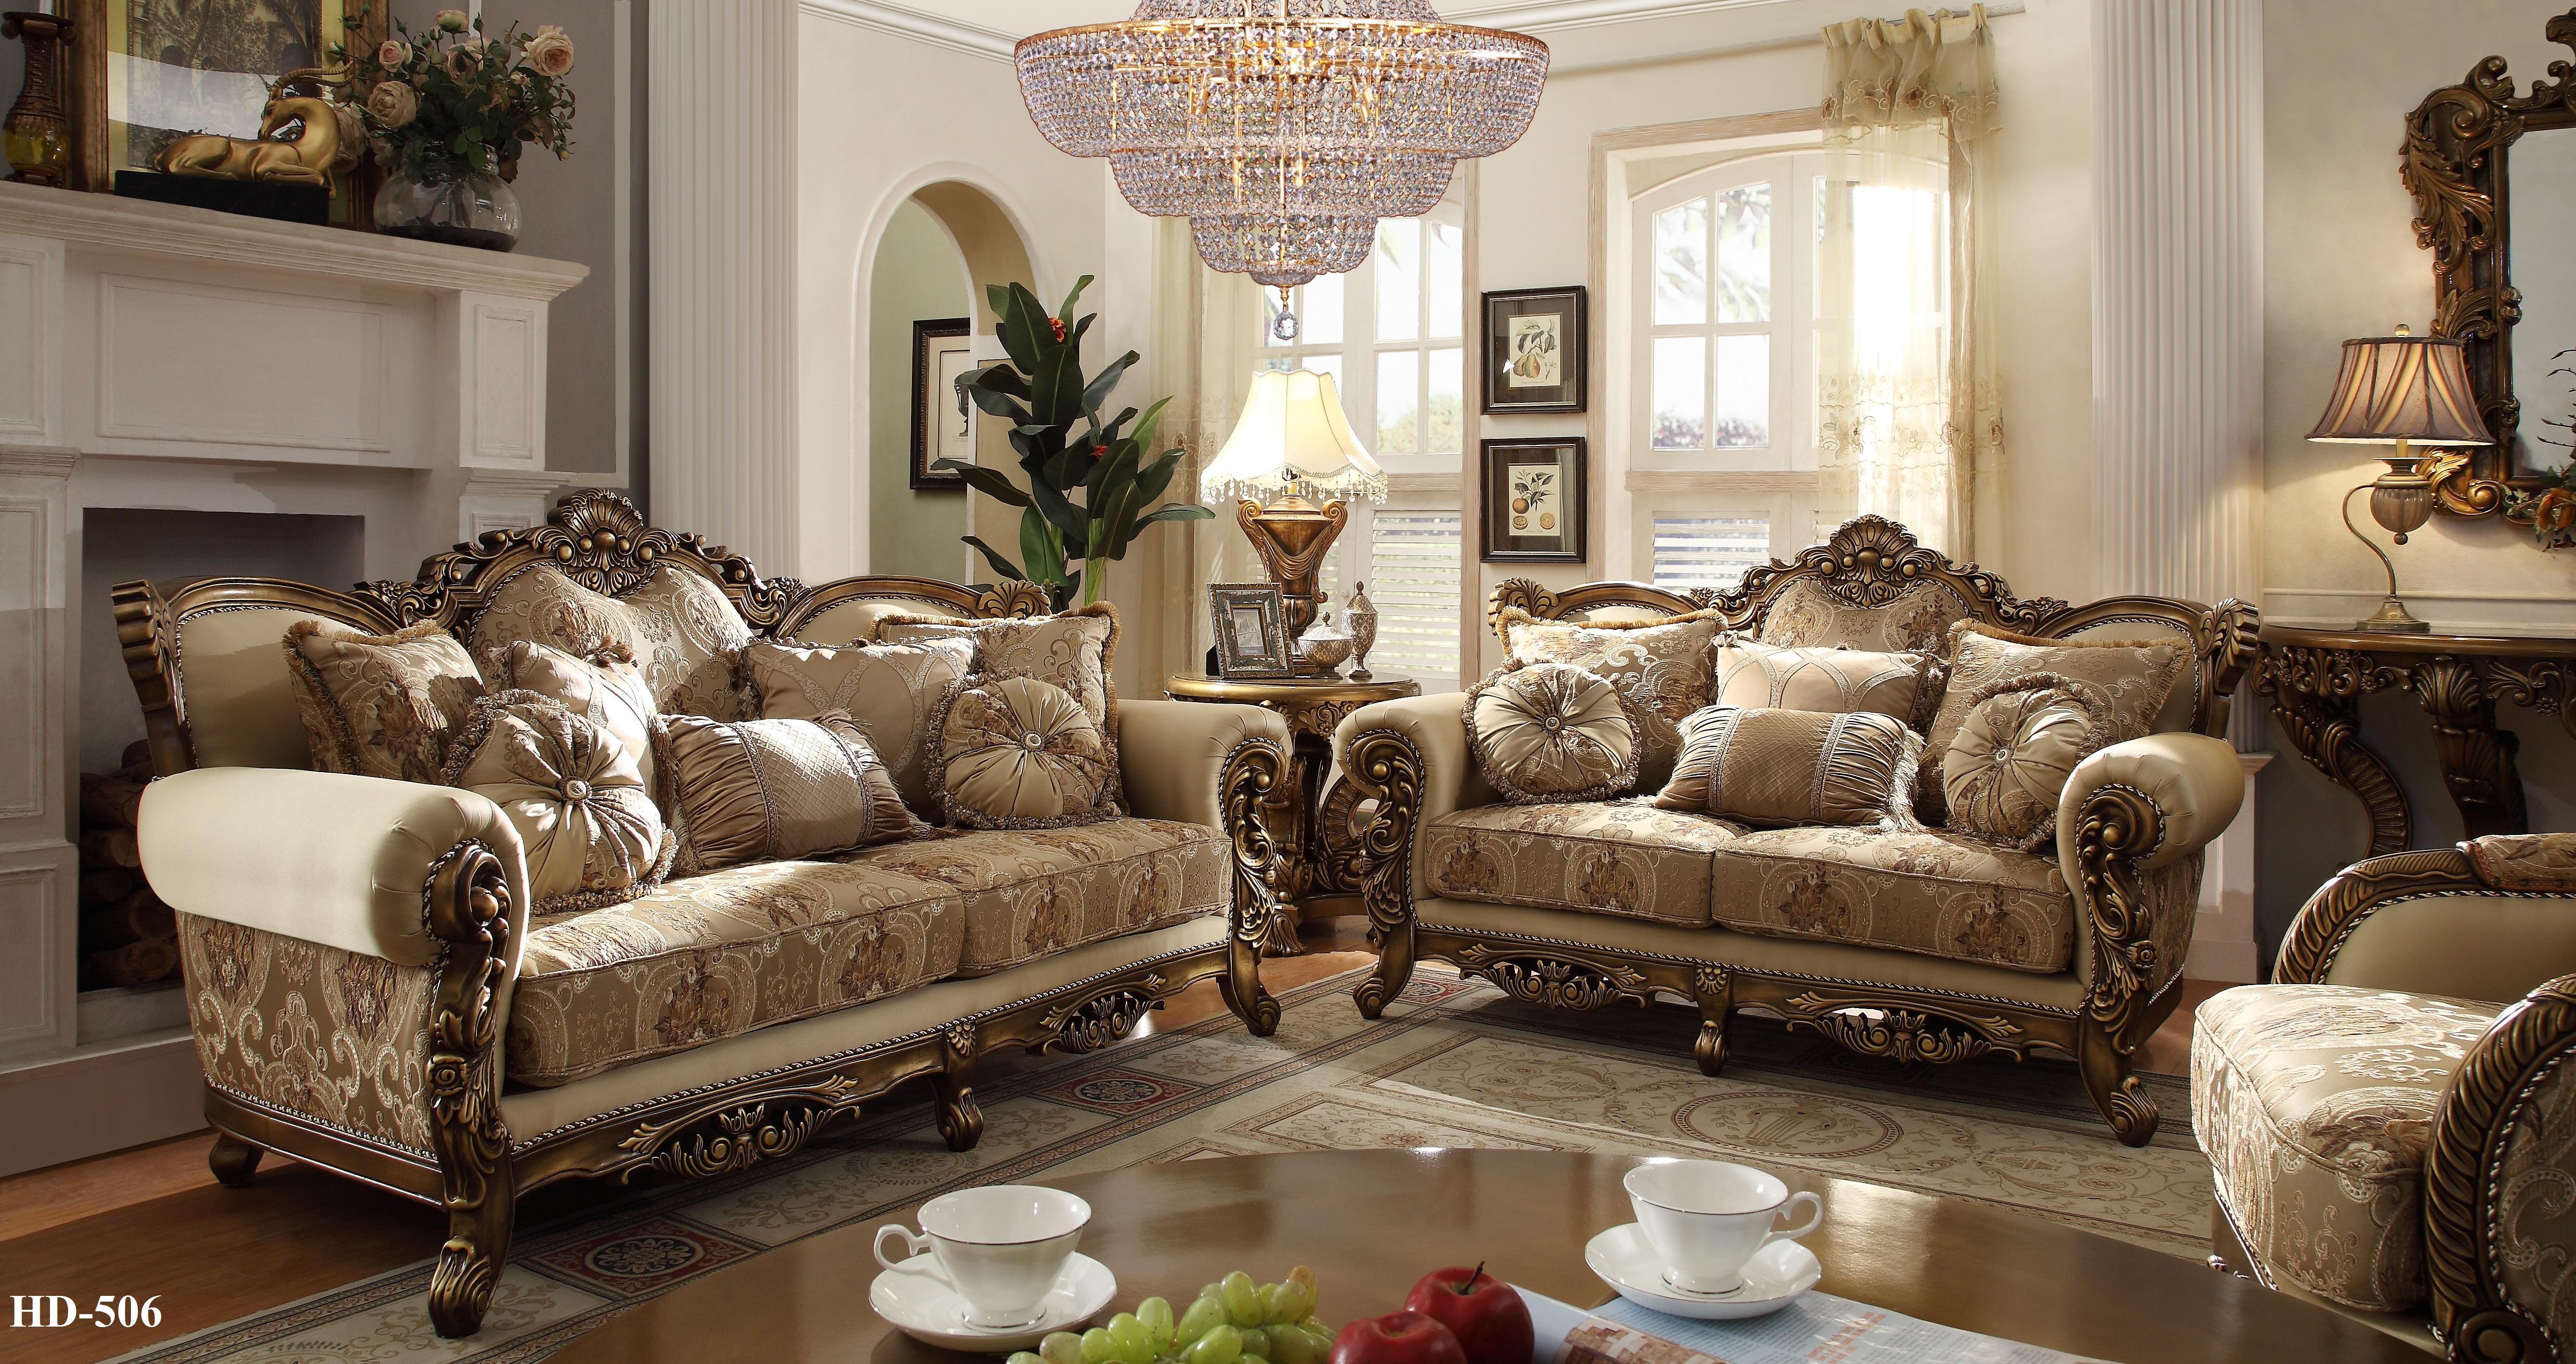 Traditional Sofa Set HD-506 HD-506-2PC in Sand, Gold, Brown Fabric